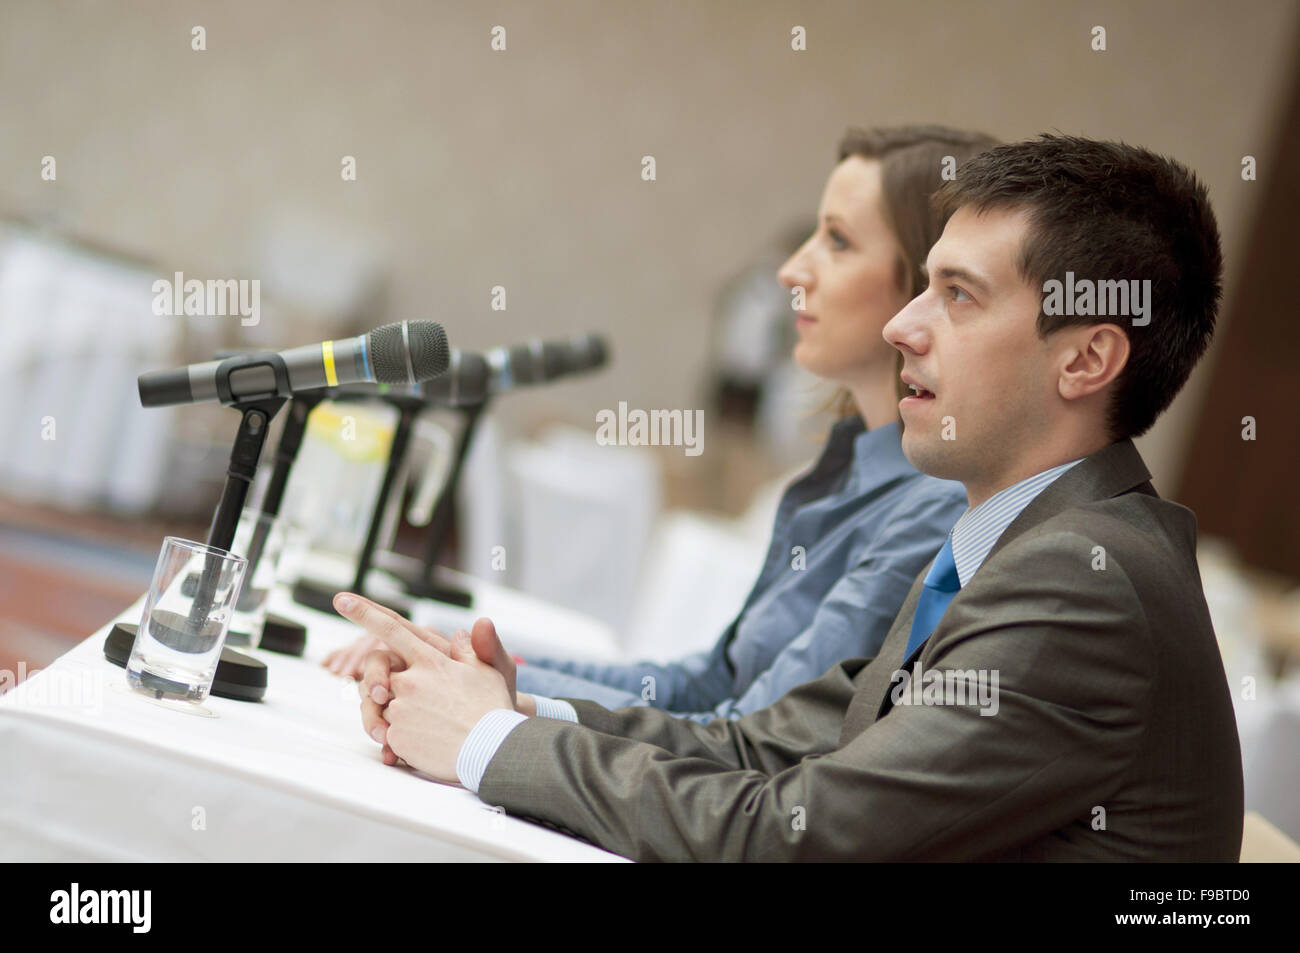 Indoor business conference for managers. Stock Photo